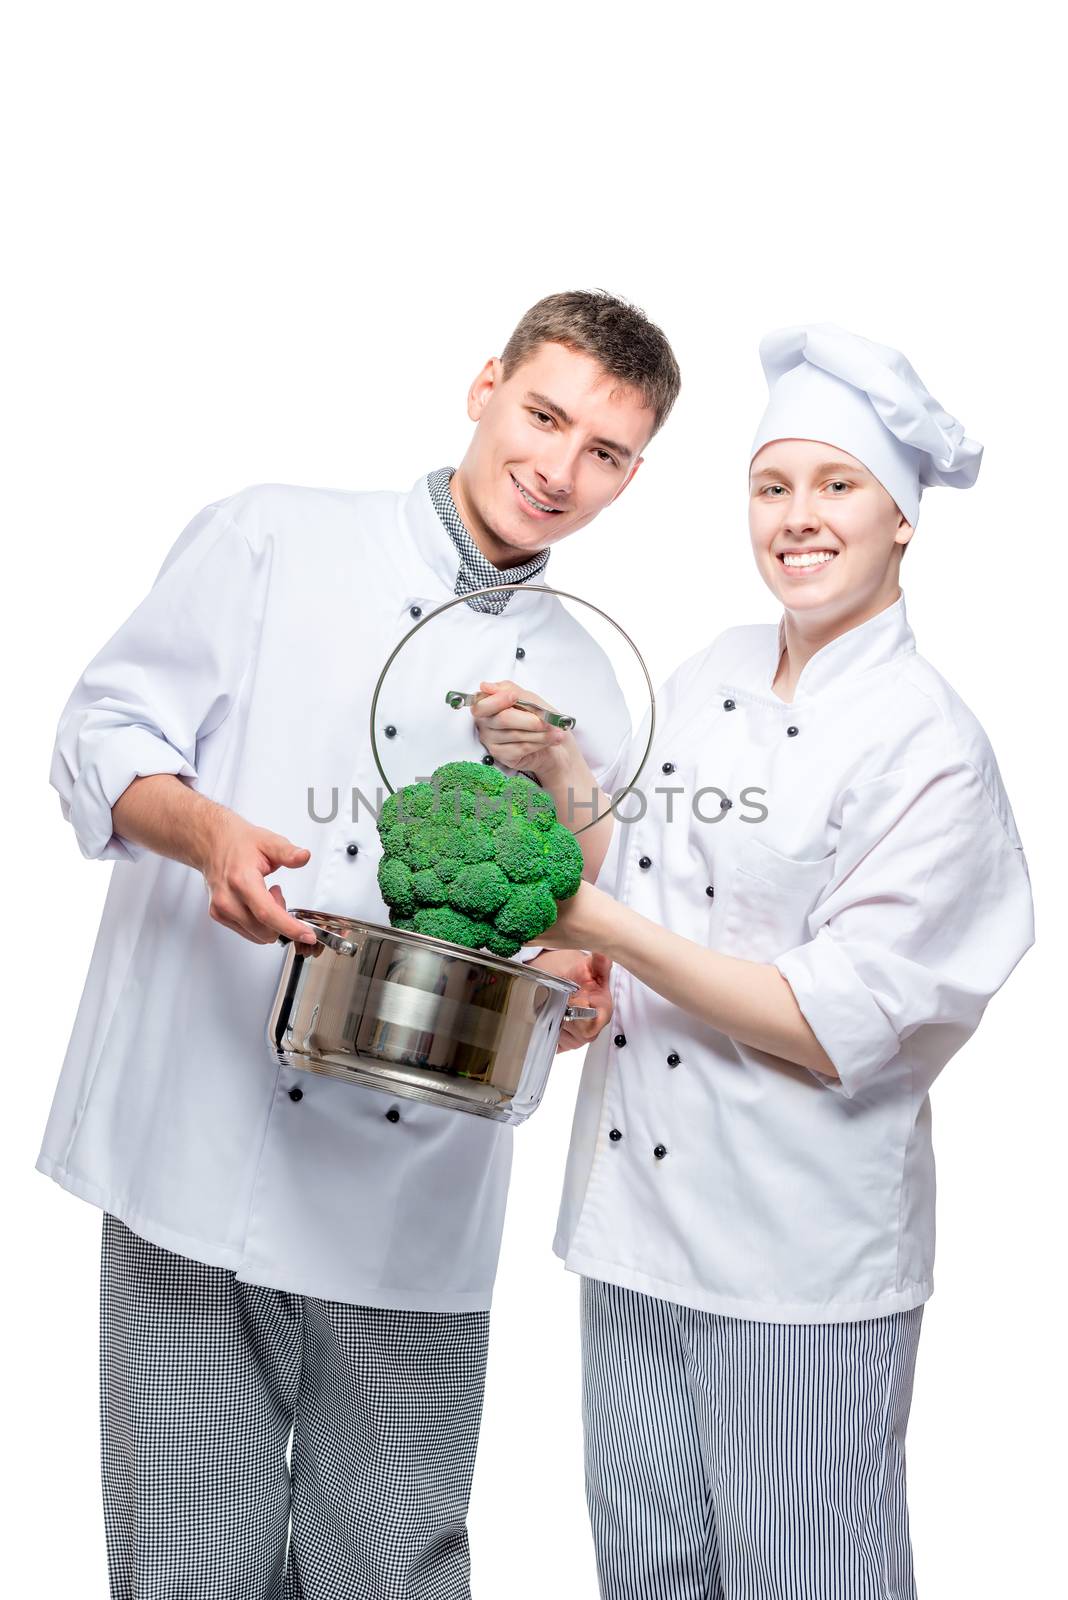 vertical portrait of fellow chefs with pan and broccoli on white background